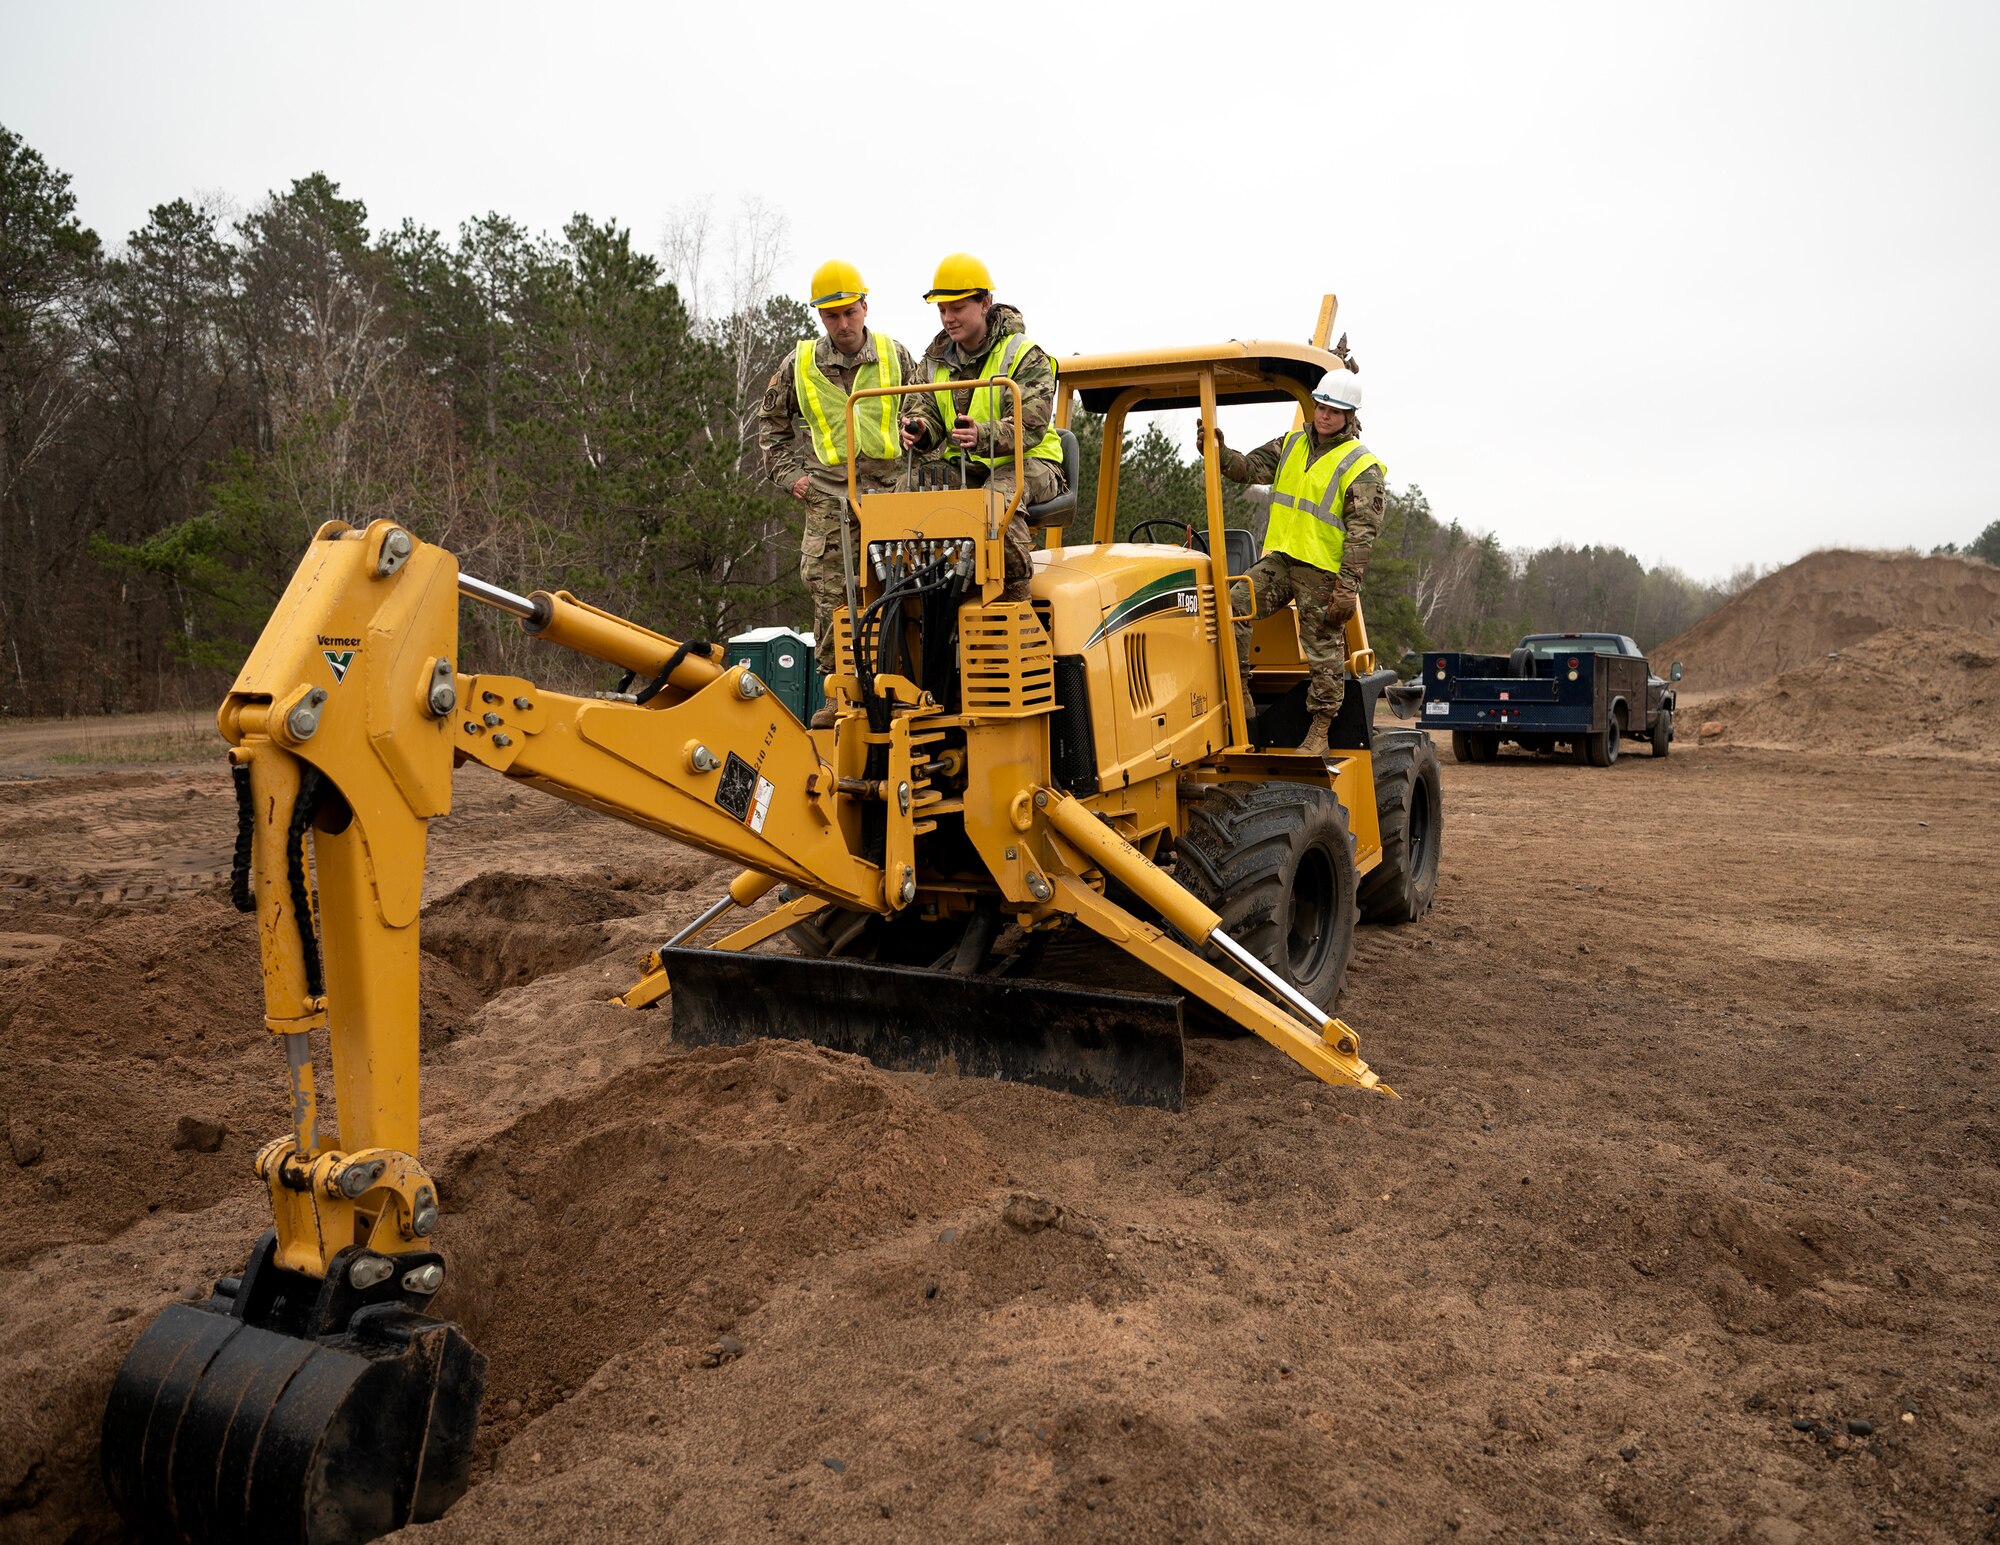 U.S. Air Force Airmen from the 210th Engineering Installation Squadron trained on Engineering and Installation of heavy equipment, including a cable reel truck, trencher, mid pro, and skid steer at Camp Ripley, Little Falls, Minn., May 5, 2023.